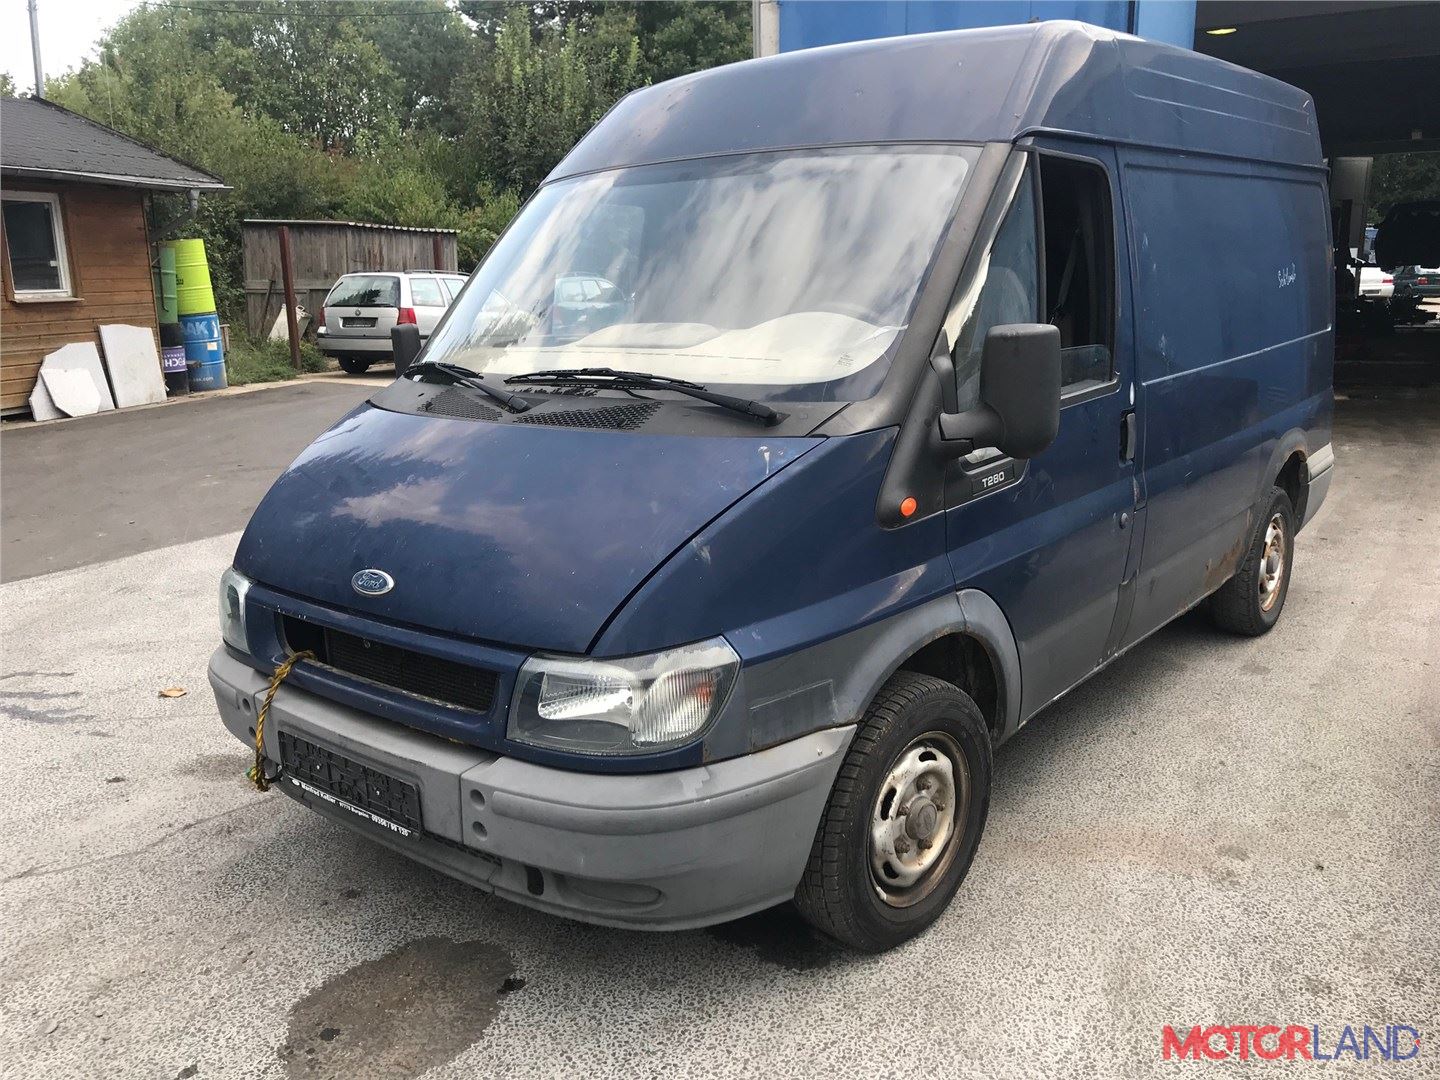 Форд транзит 2.0 2000 2006. Ford Transit 2000. Ford Транзит 2000. Ford Transit (2000-2005). Форд Транзит 2006.